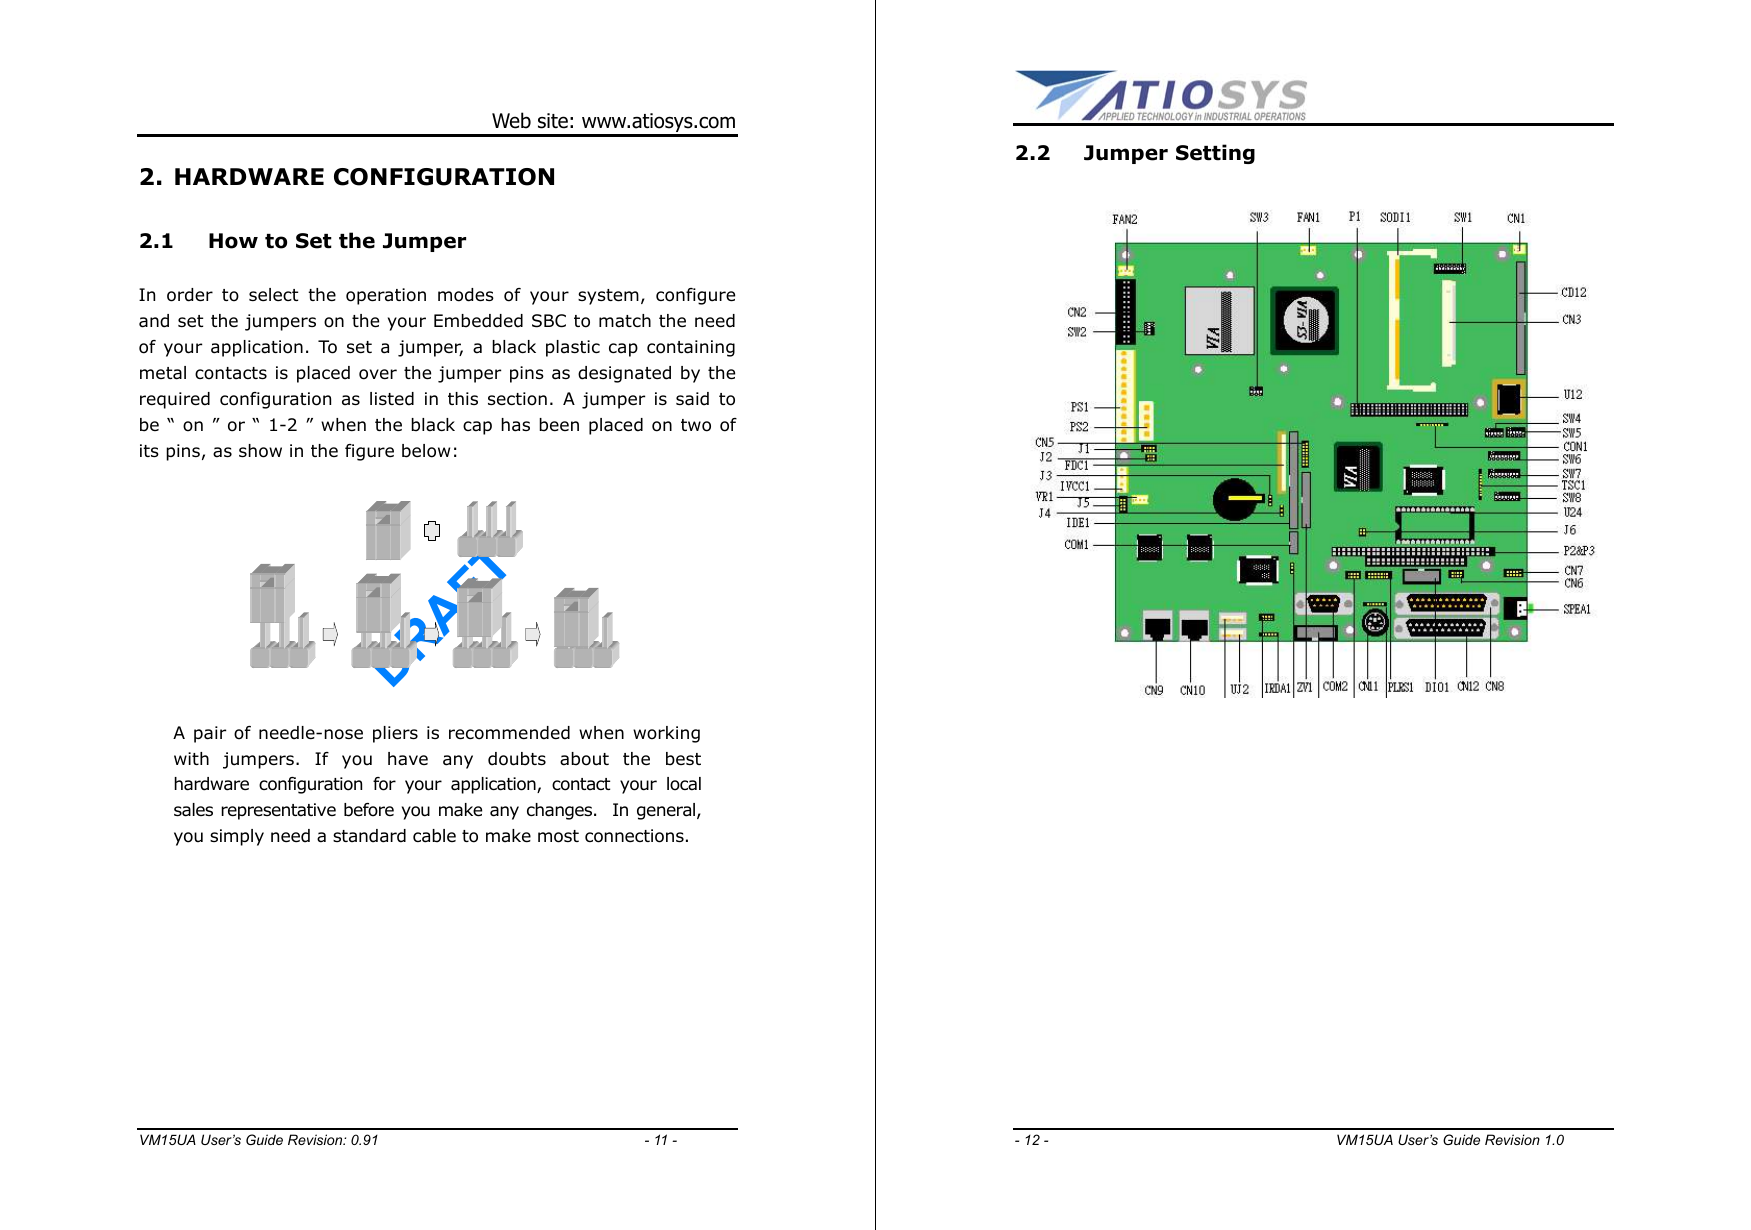 DRAFT Web site: www.atiosys.com VM15UA User’s Guide Revision: 0.91                                     - 11 - 2. HARDWARE CONFIGURATION 2.1  How to Set the Jumper  In order to select the operation modes of your system, configure and set the jumpers on the your Embedded SBC to match the need of your application. To set a jumper, a black plastic cap containing metal contacts is placed over the jumper pins as designated by the required configuration as listed in this section. A jumper is said to be “ on ” or “ 1-2 ” when the black cap has been placed on two of its pins, as show in the figure below:           A pair of needle-nose pliers is recommended when working with jumpers. If you have any doubts about the best hardware configuration for your application, contact your local sales representative before you make any changes.  In general, you simply need a standard cable to make most connections.  DRAFT - 12 -                                        VM15UA User’s Guide Revision 1.0  2.2 Jumper Setting   